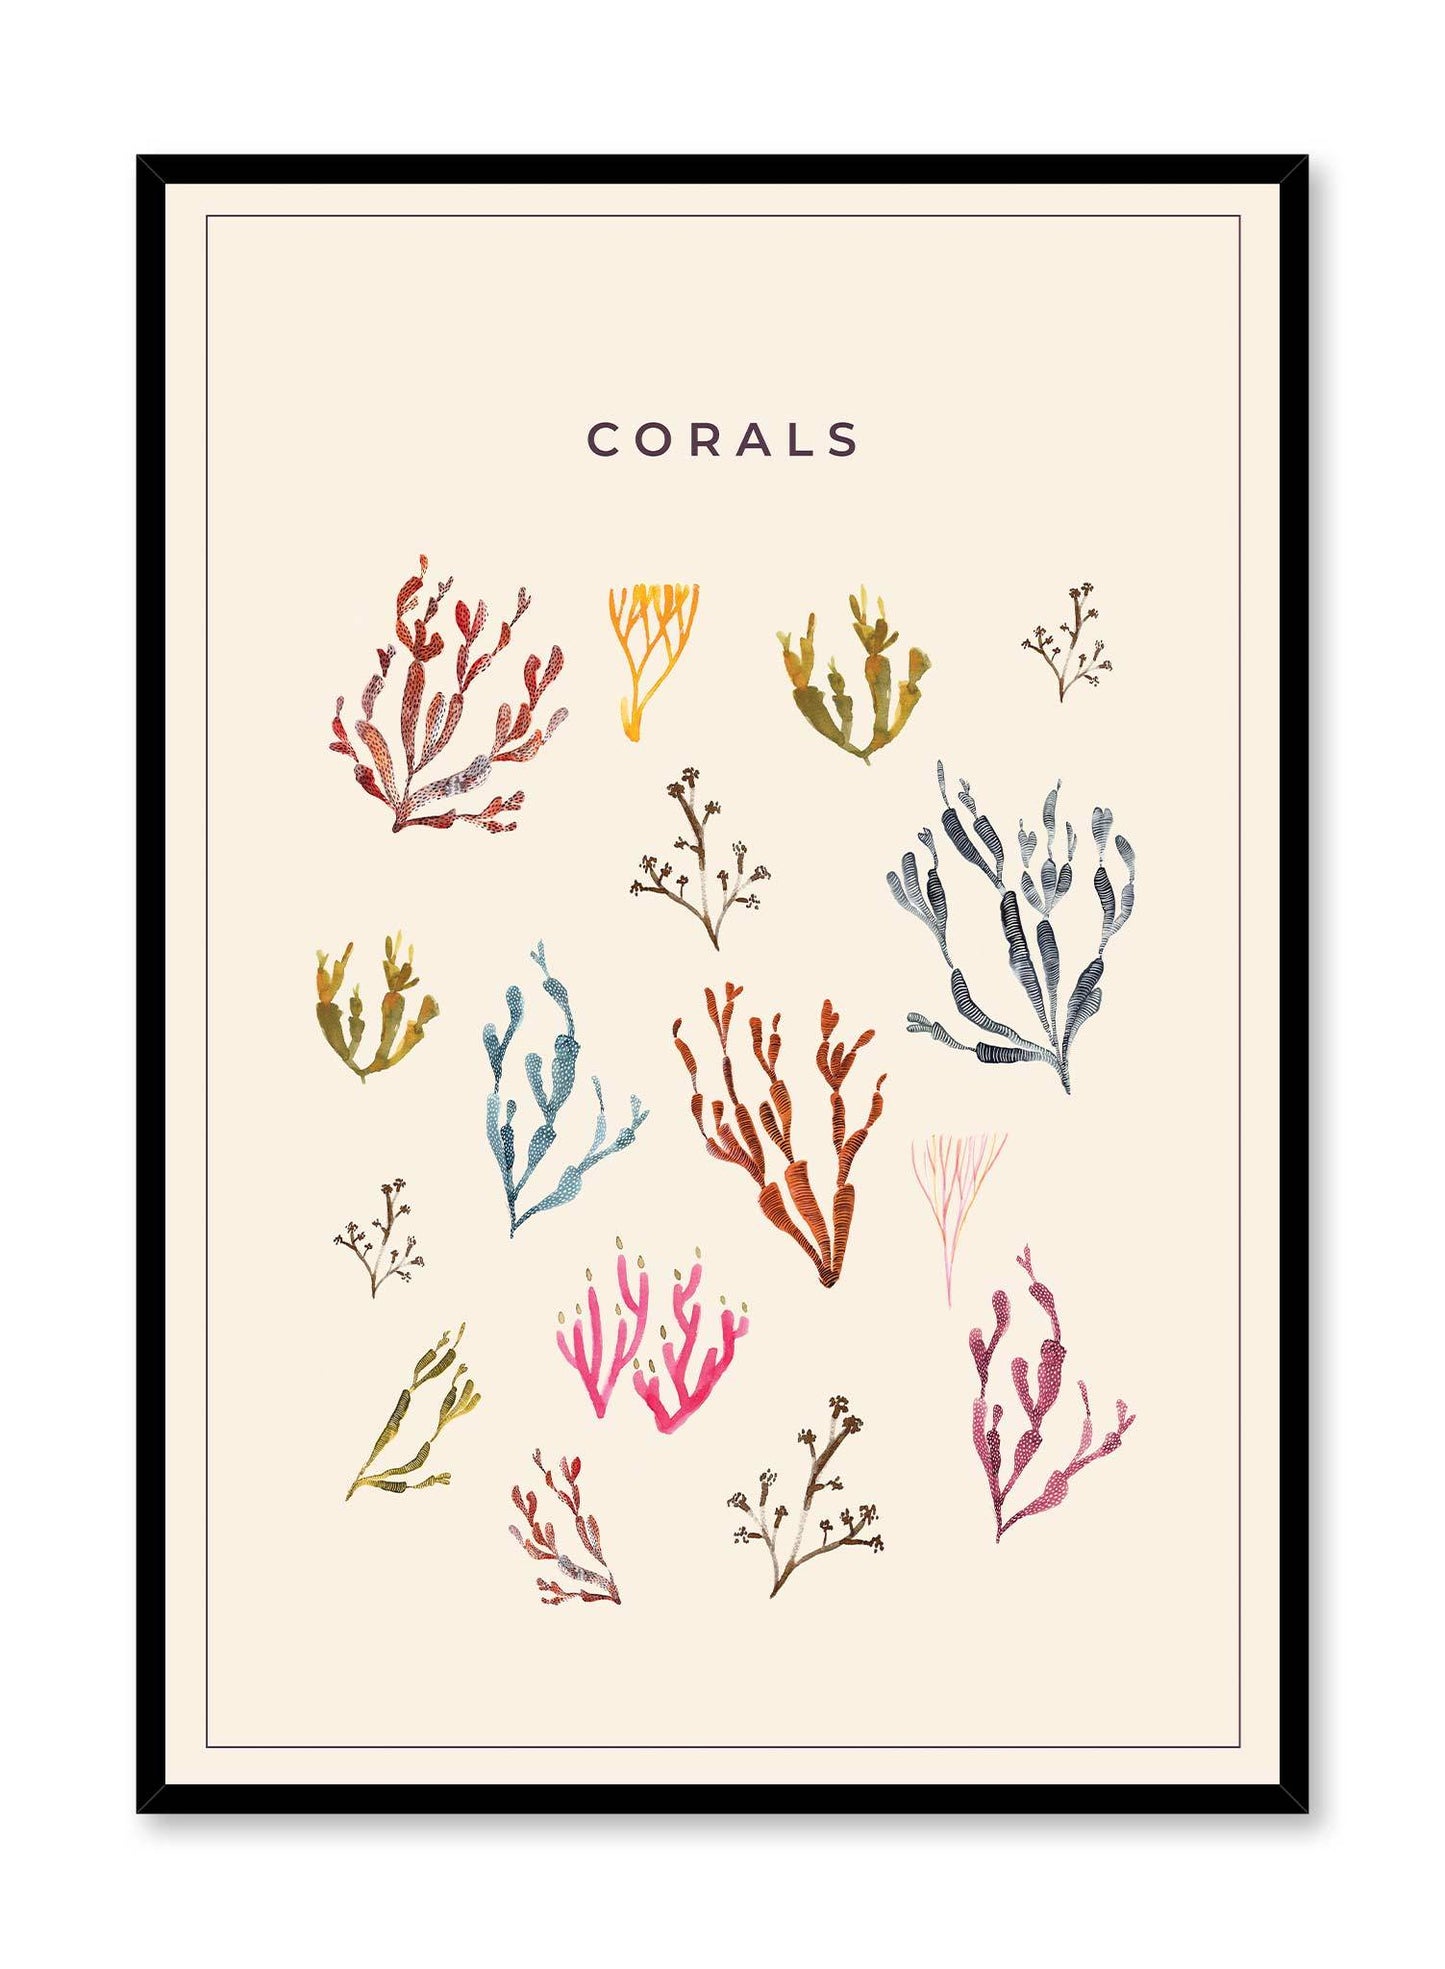 Coral Reef is a minimalist illustration of a collection of colourful branches of corals of different styles by Opposite Wall.